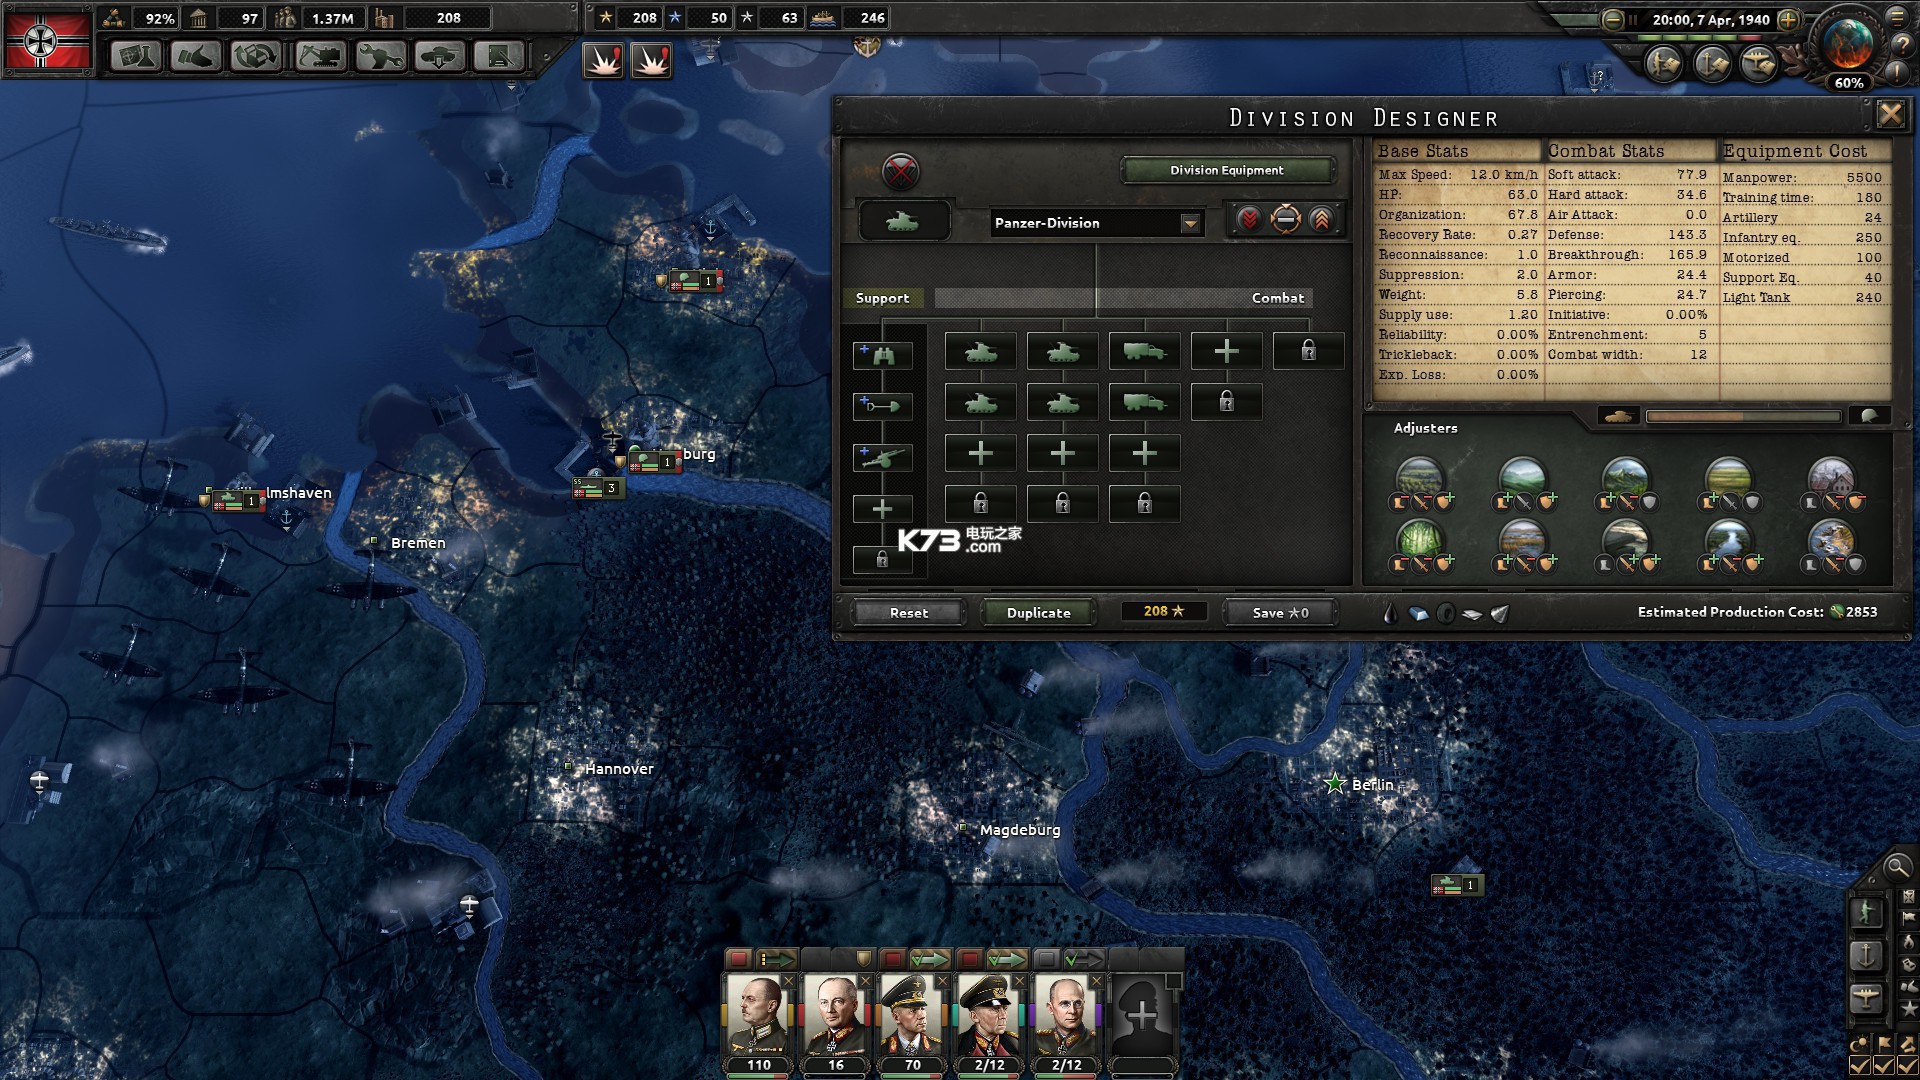 what hearts of iron 4 dlc are good